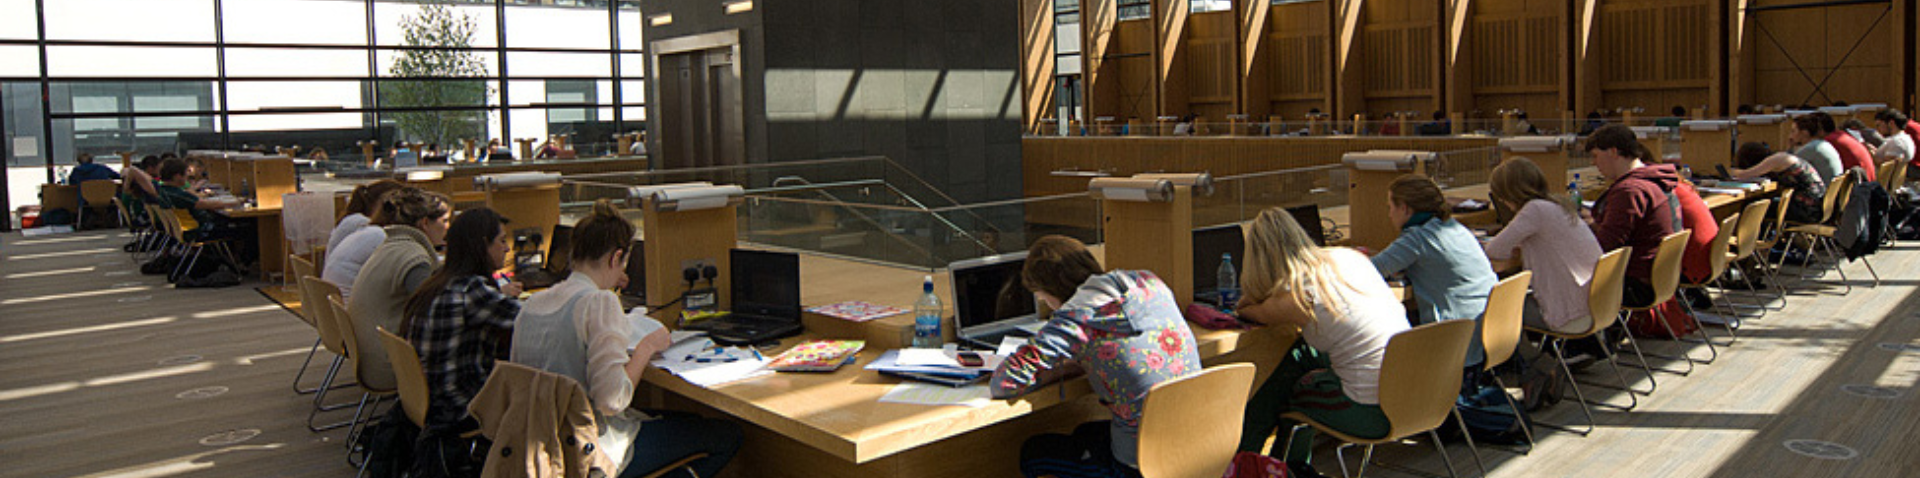 Inside Banner Library Students